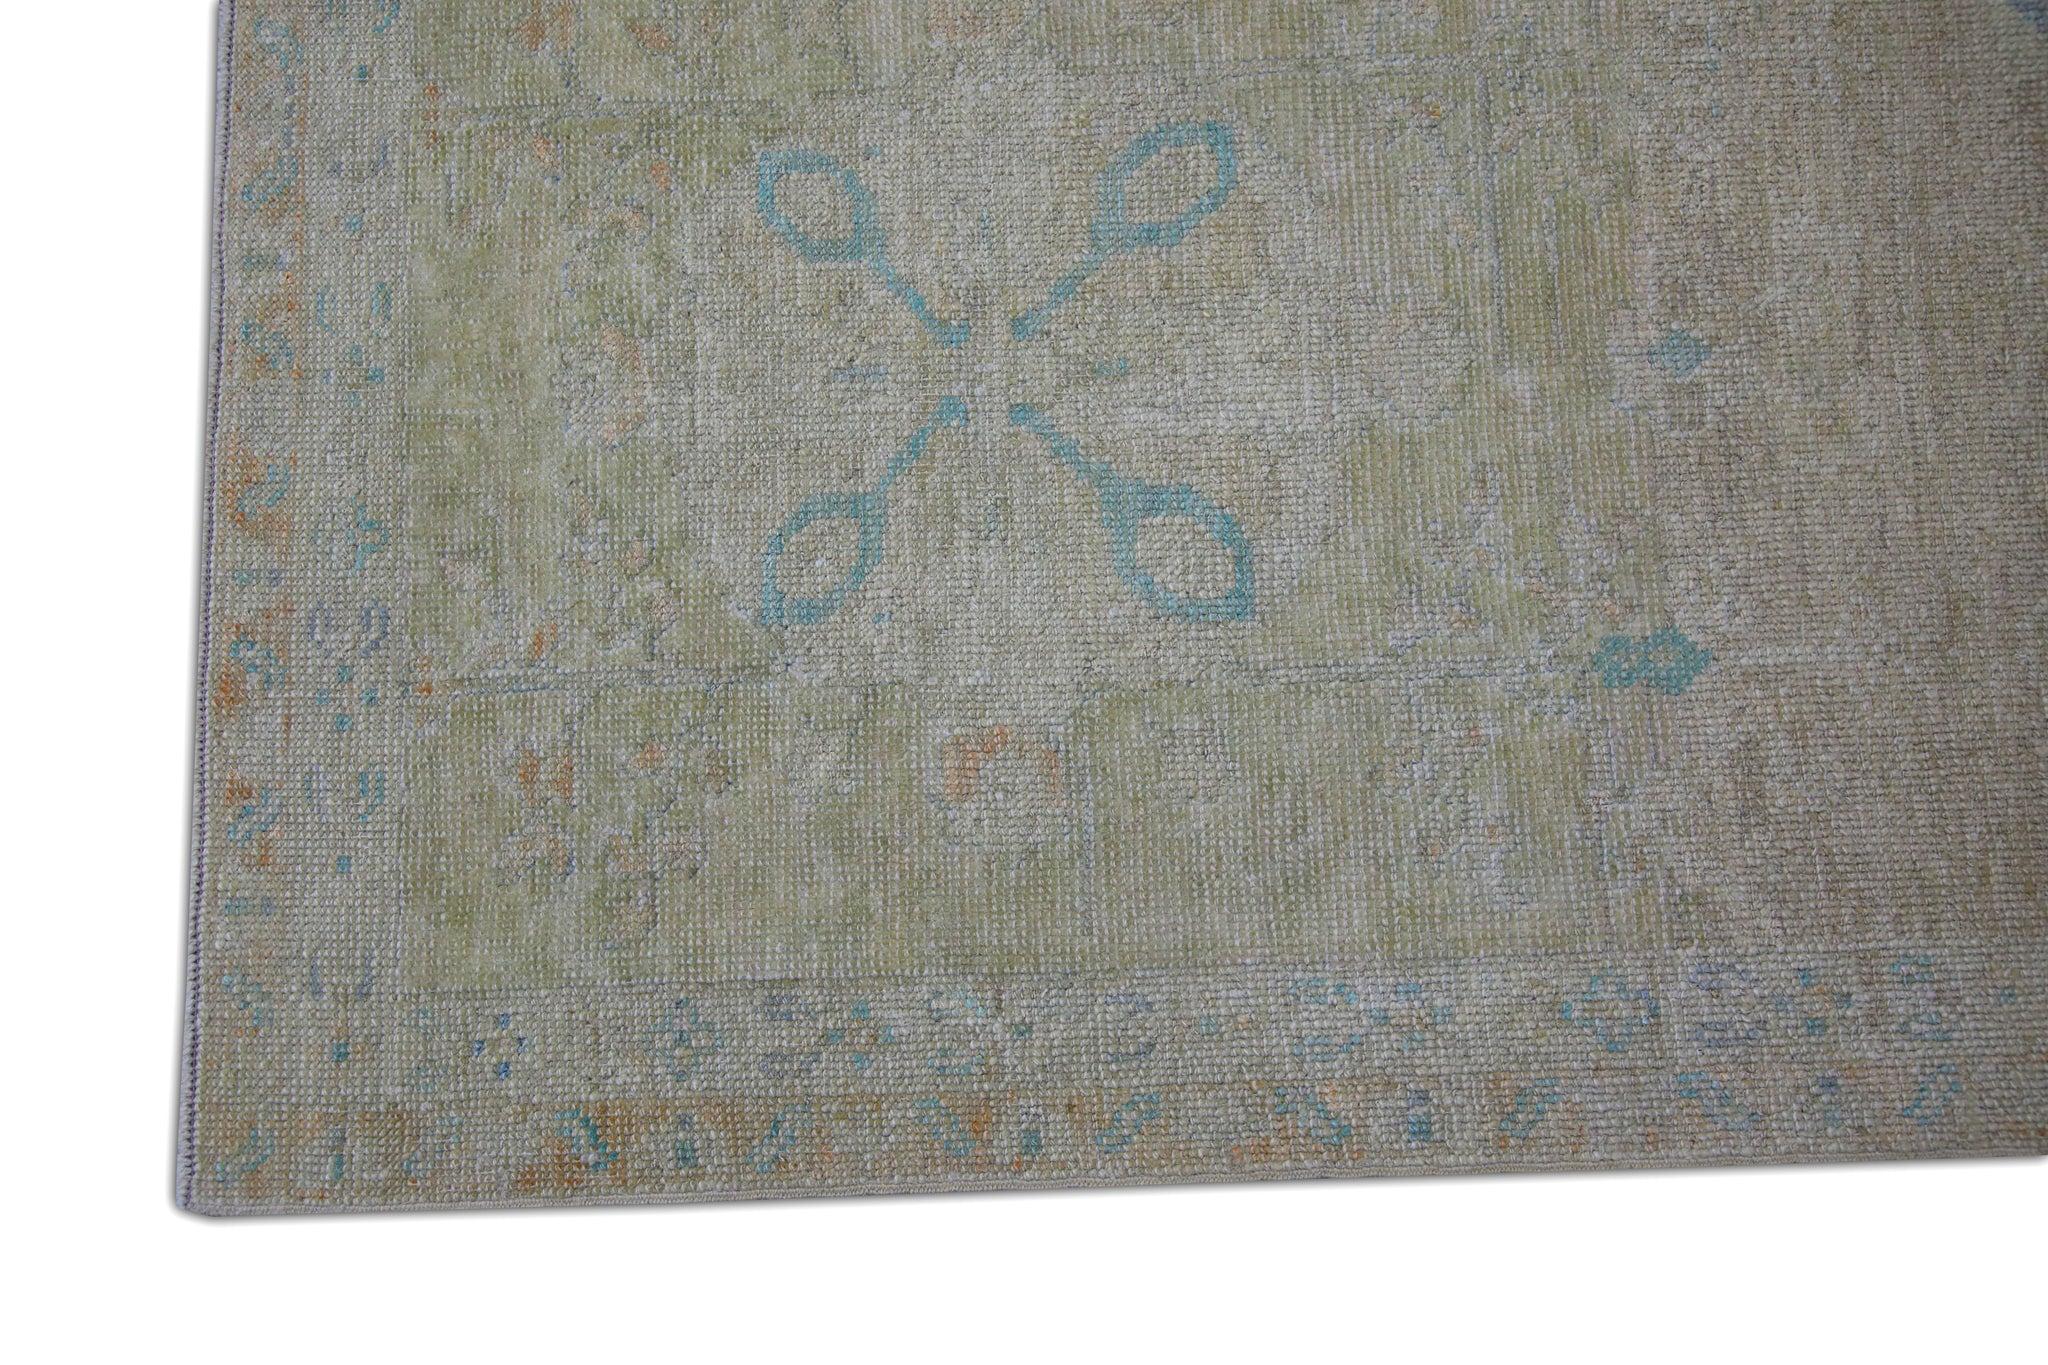 This Turkish finewoven oushak rug is a stunning piece of art that has been handwoven using traditional techniques by skilled artisans. The rug features intricate patterns and a soft color palette that is achieved through the use of natural vegetable